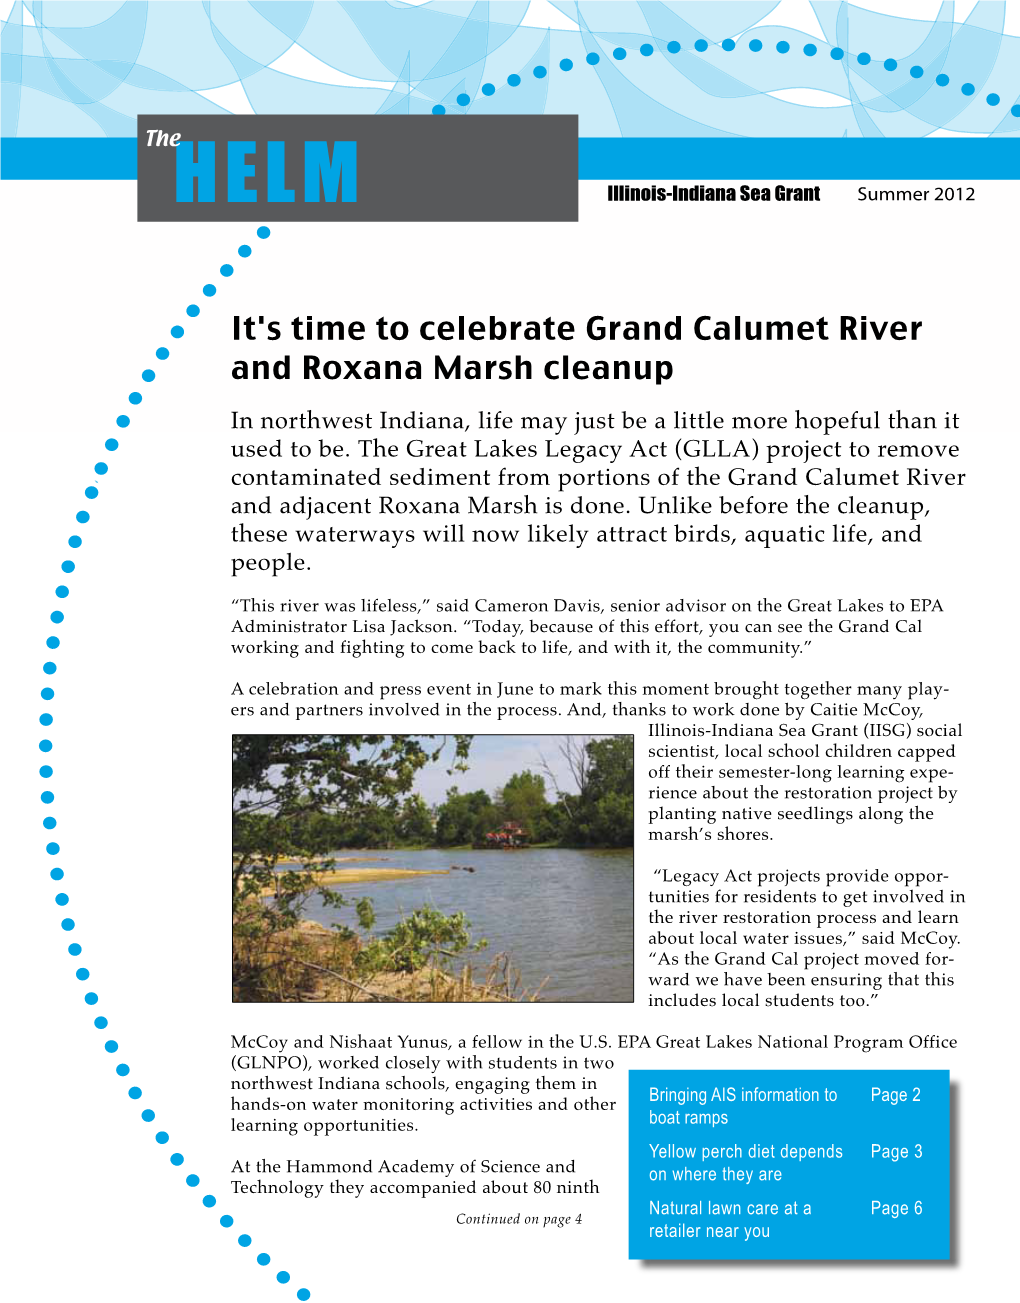 It's Time to Celebrate Grand Calumet River and Roxana Marsh Cleanup